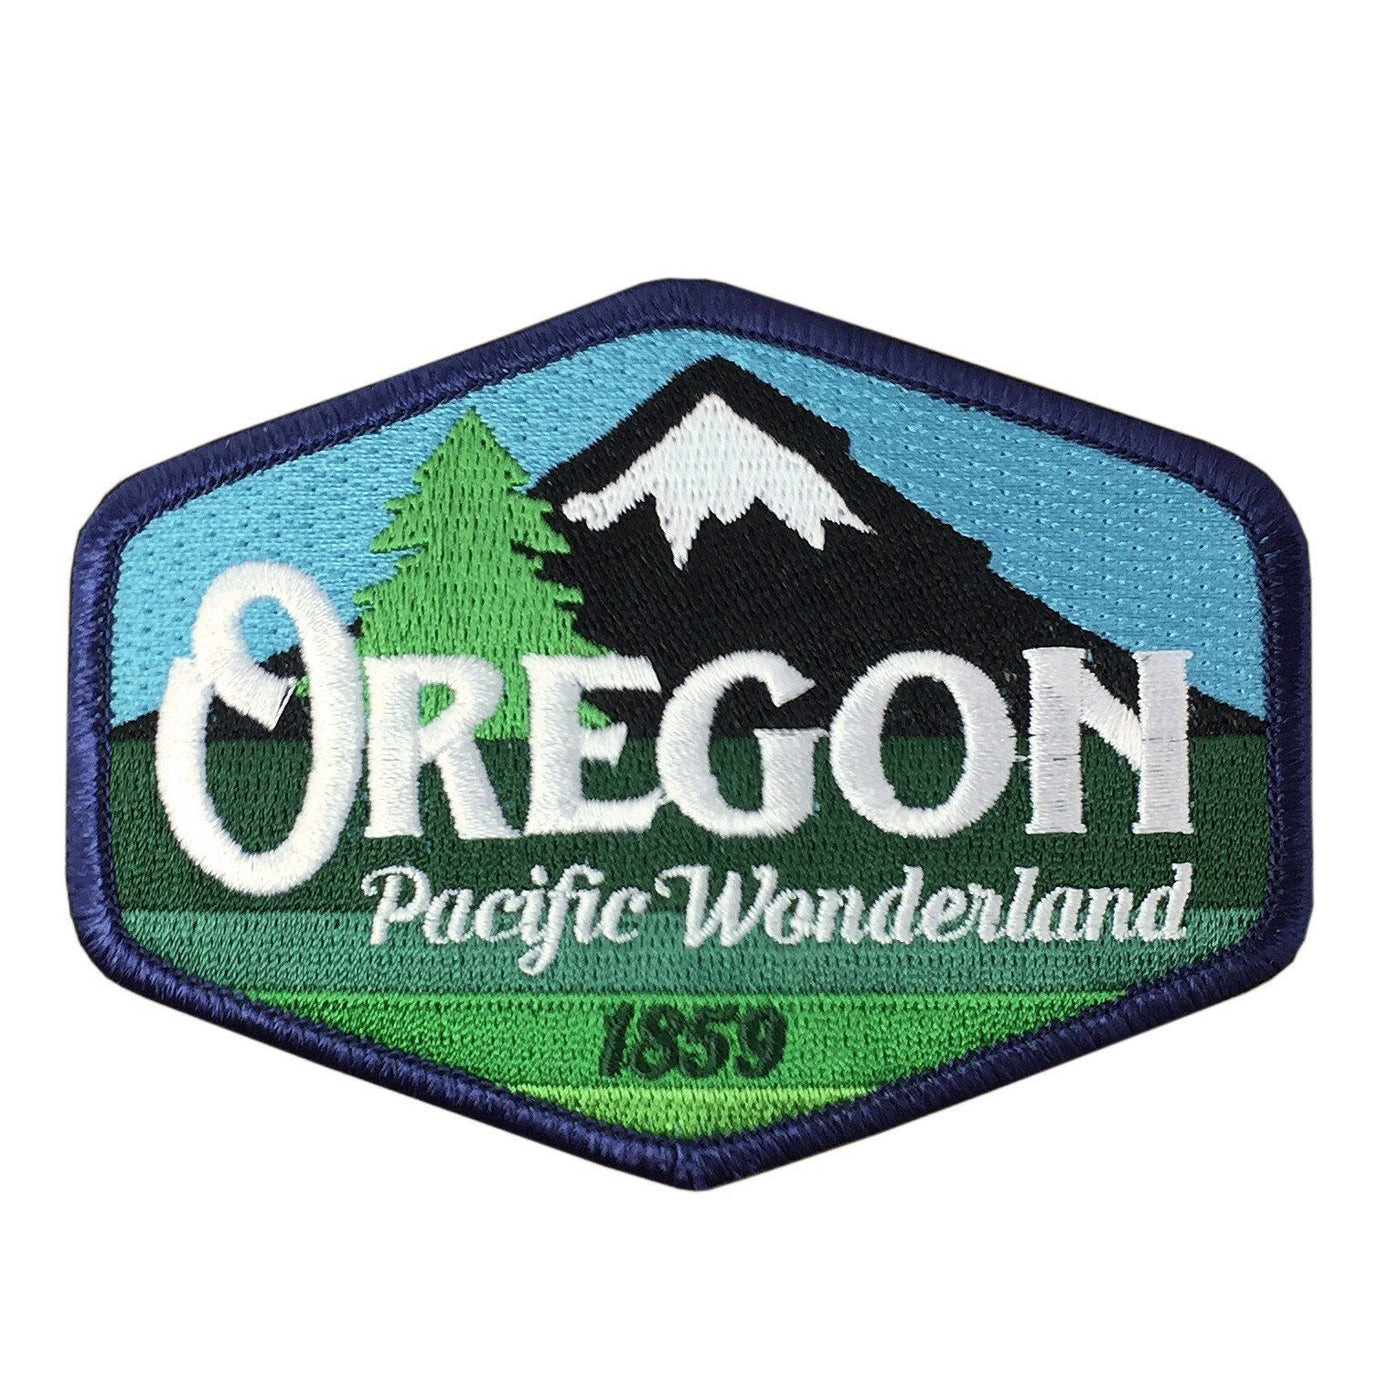 Little Bay Root - Oregon Pacific Wonderland Vintage Embroidered Patch - Knock Your Socks Off